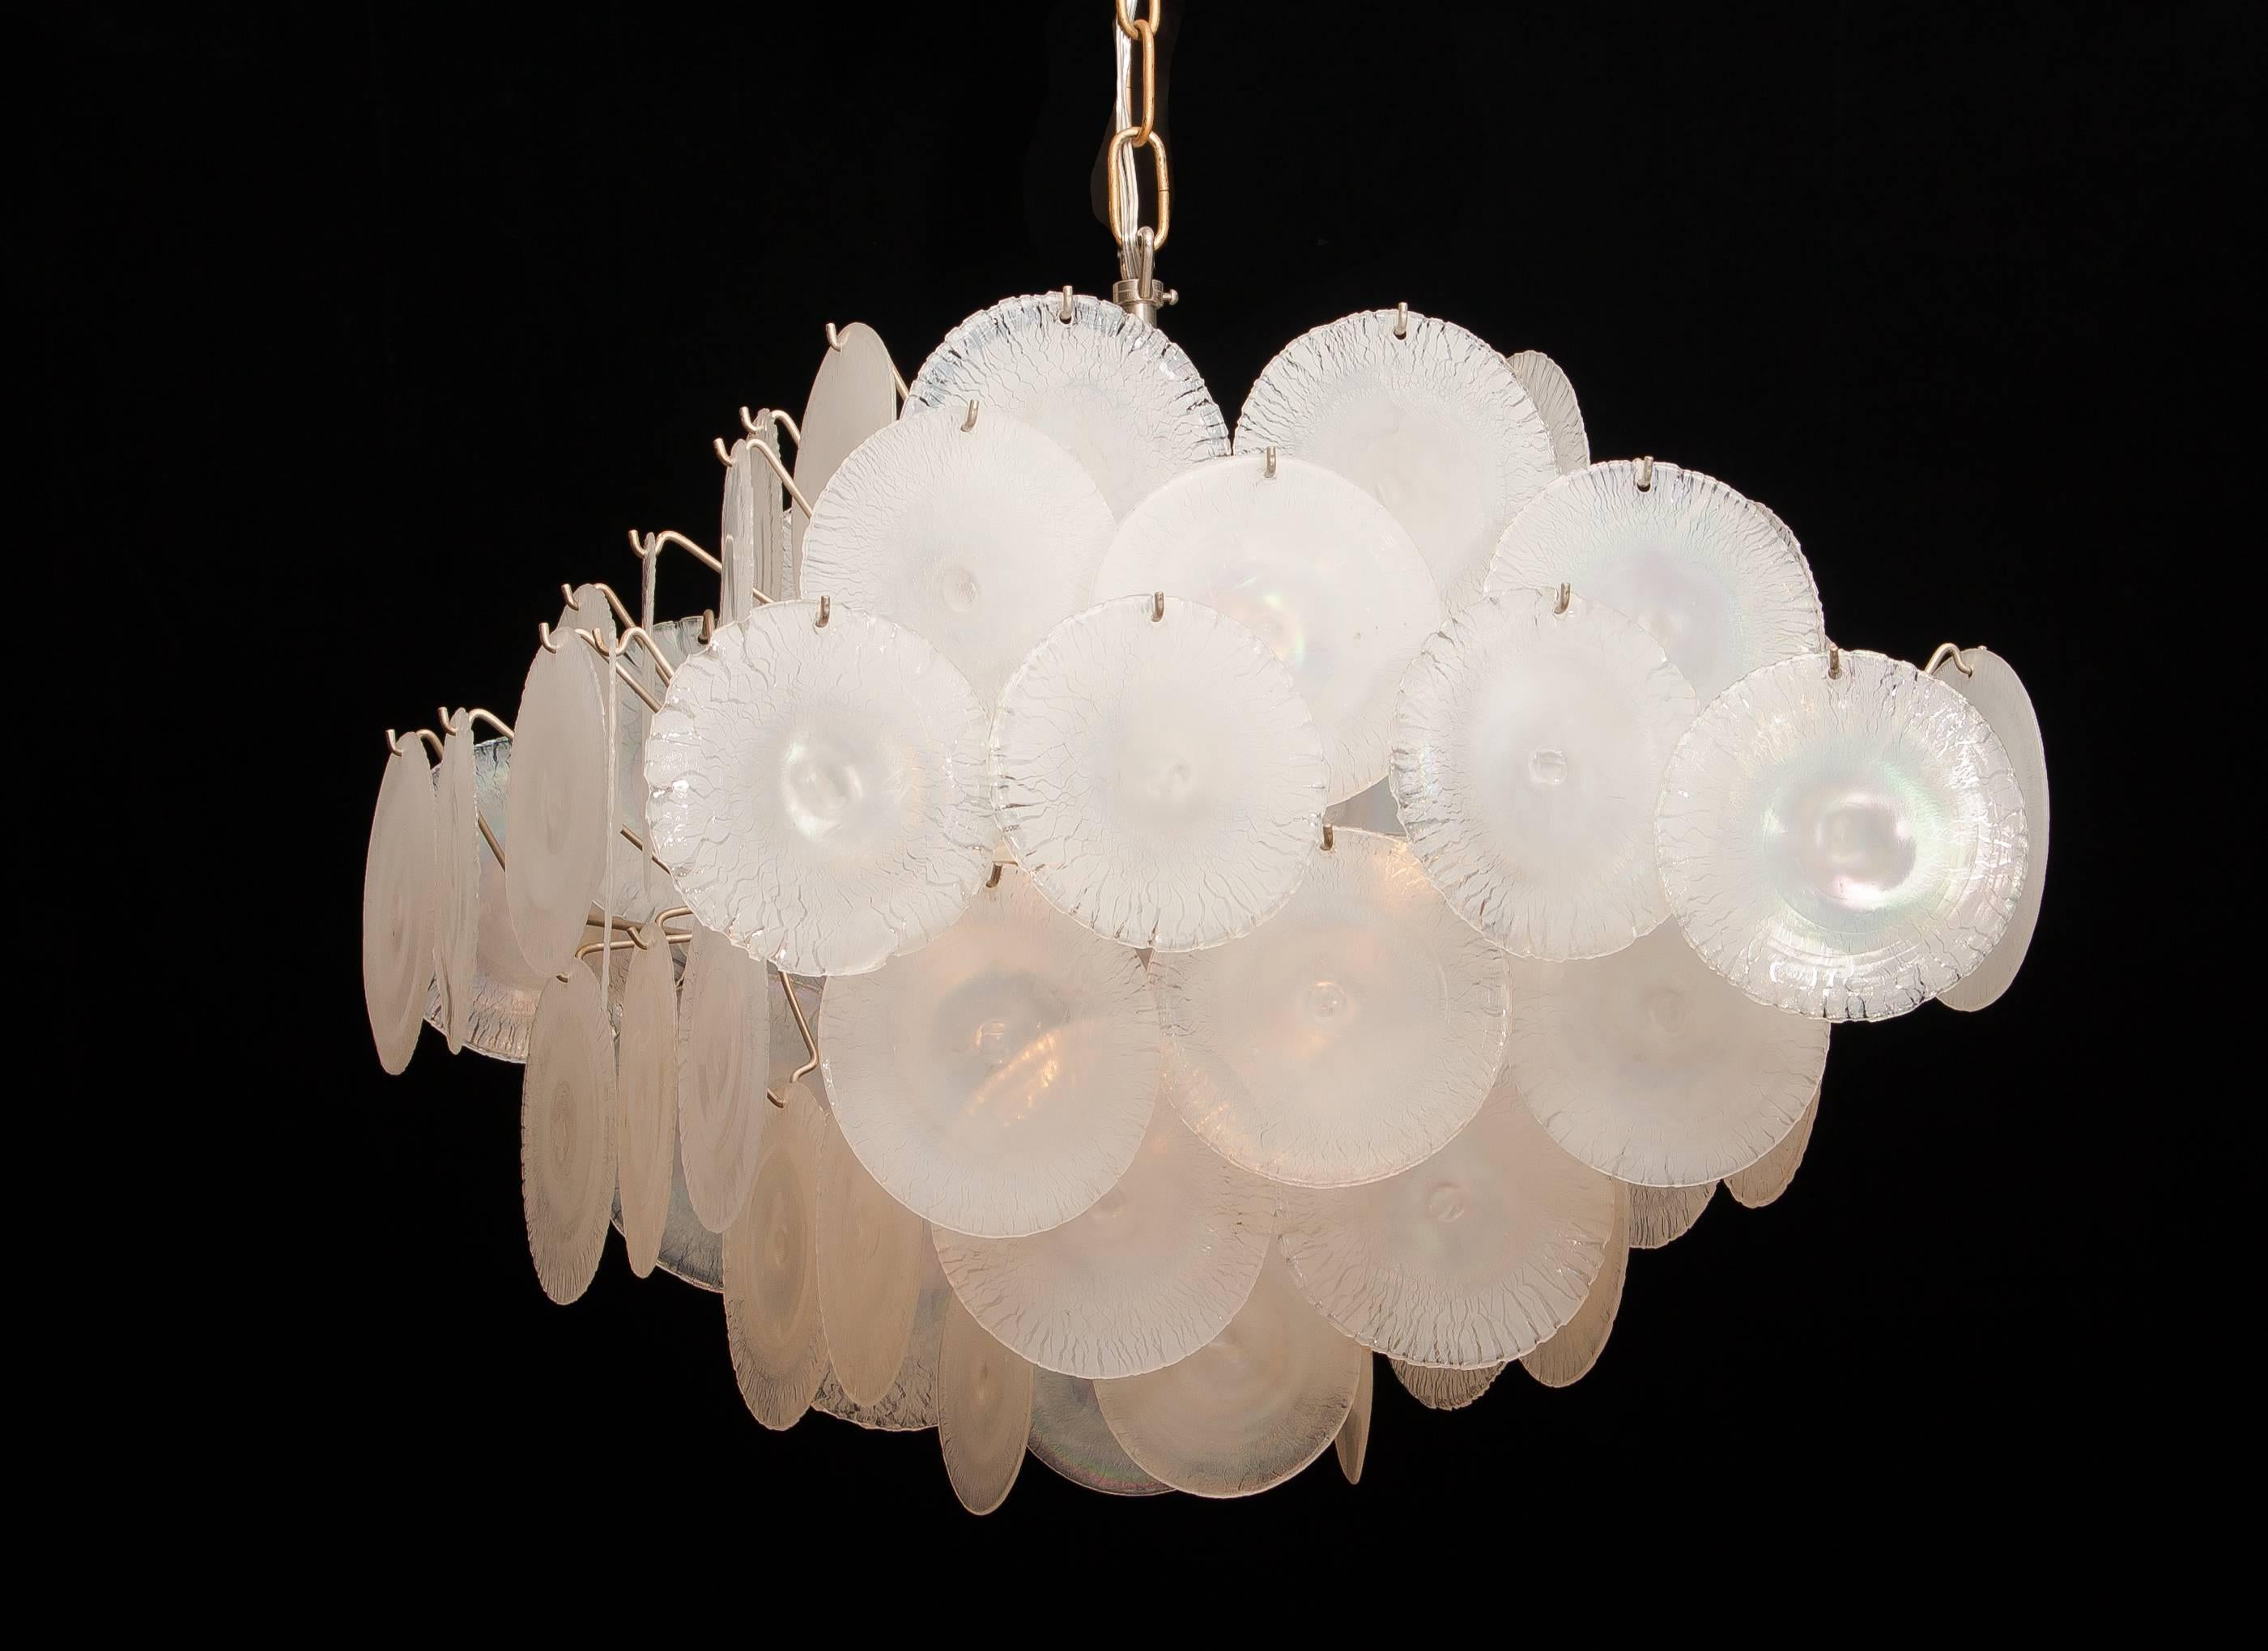 Extremely beautiful Gino Vistosi chandelier with white or pearl colored handmade Murano crystal discs. 

This Gino Vistosi chandelier is made in Italy in the 1960s. The chandelier contains 60 Murano white/pearl coloured crystal discs. All in